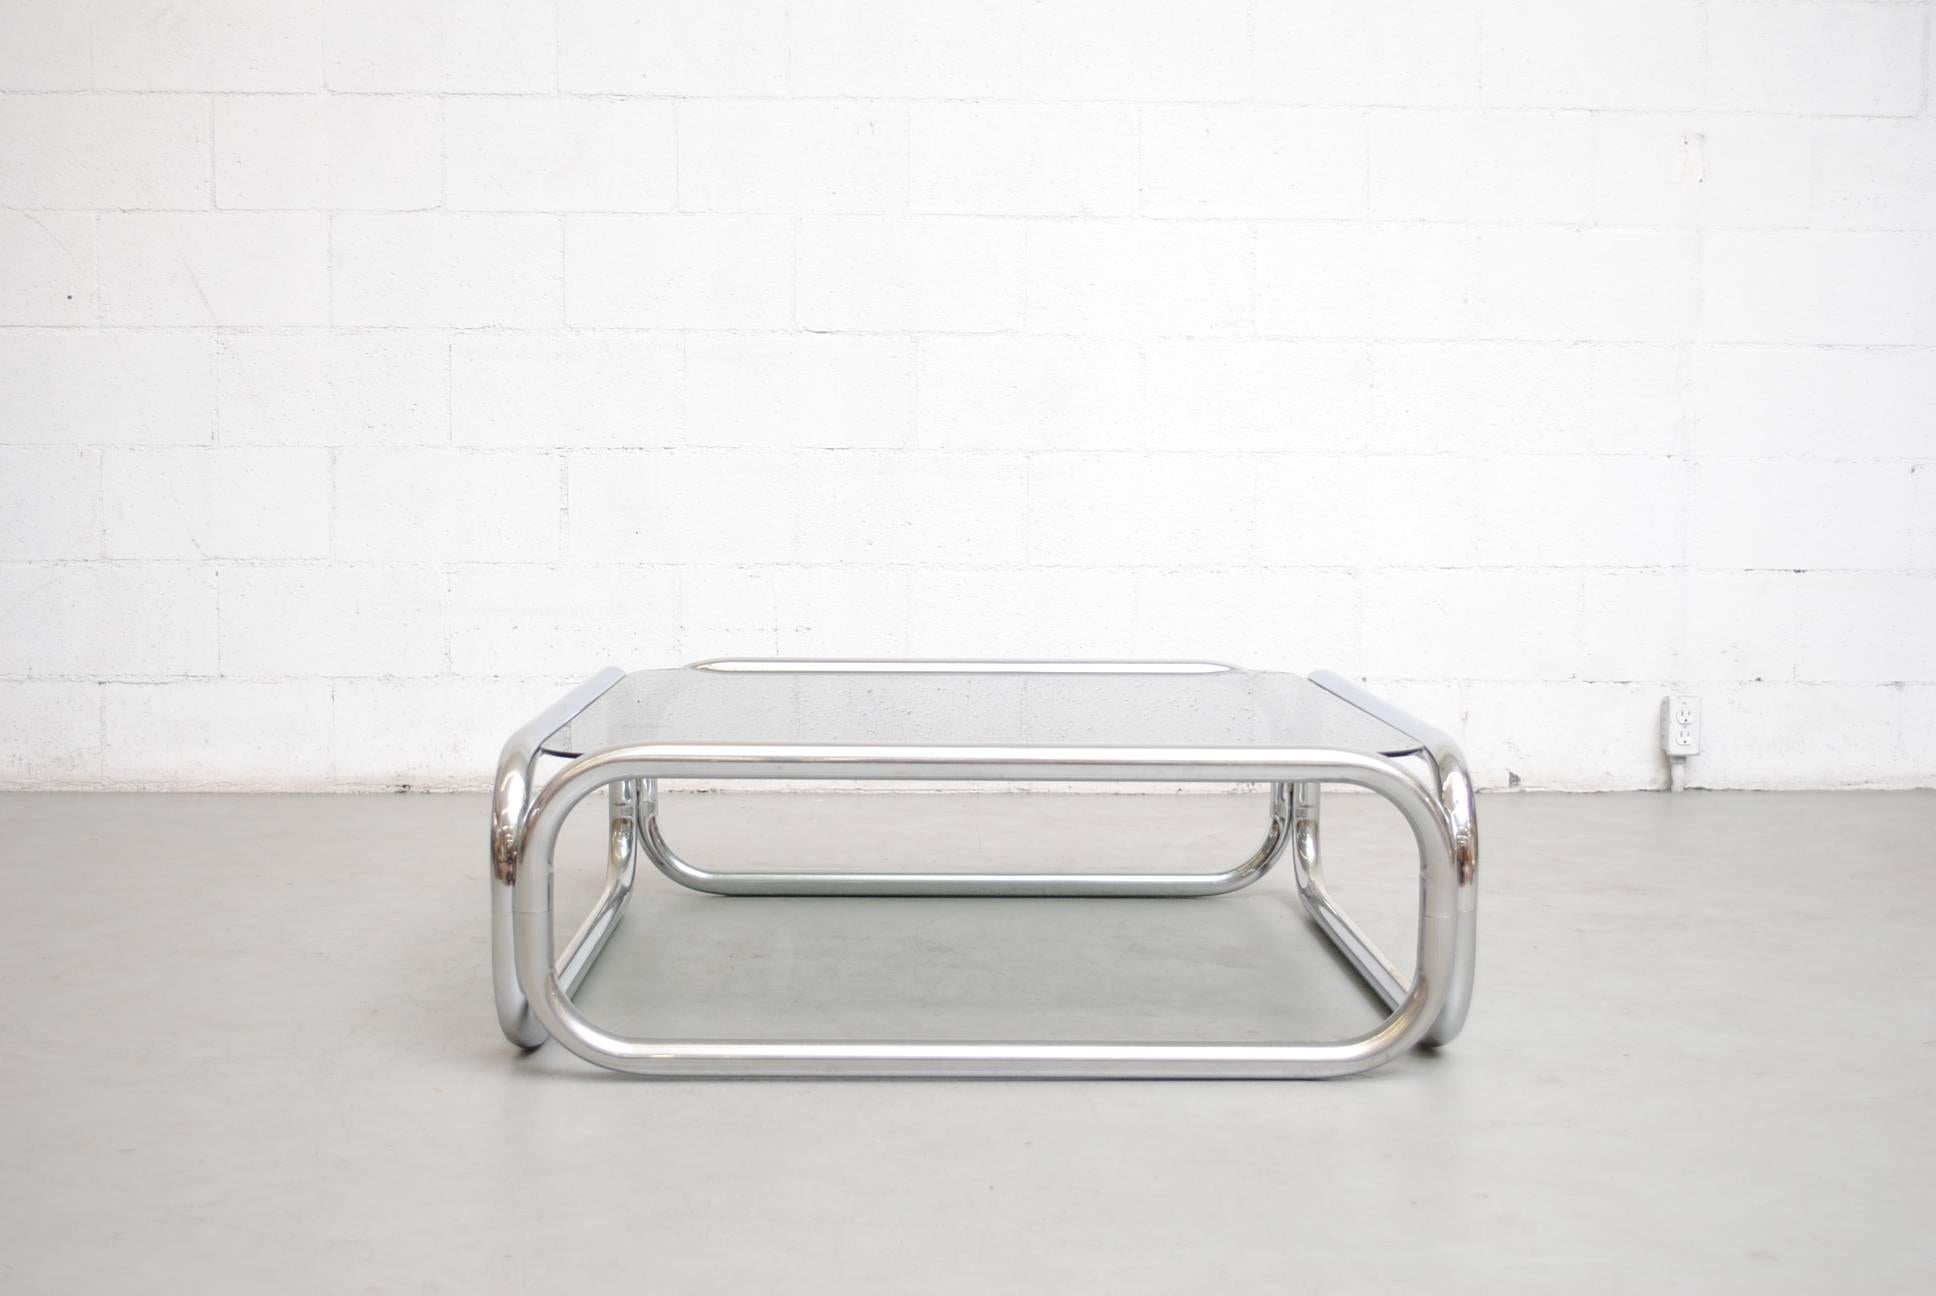 Impressive fat chrome tubular coffee table with smoked glass top. Superb design. Visible wear consistent with its age and usage.